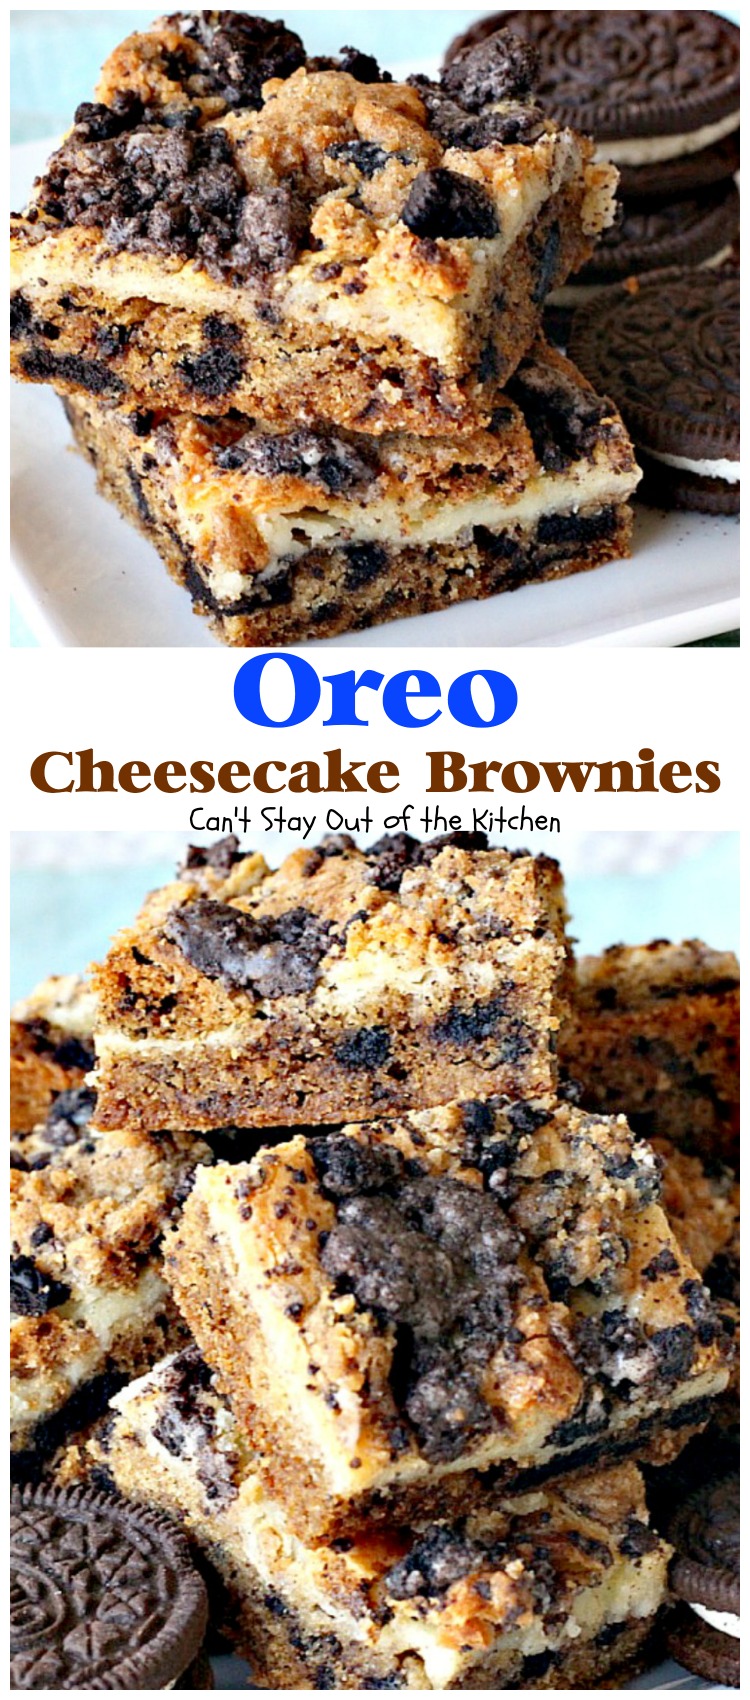 Oreo Cheesecake Brownies | Can't Stay Out of the Kitchen | these #brownies are divine! They have a scrumptious #cheesecake layer along with #Oreo #cookie dough. Amazing. #chocolate #dessert